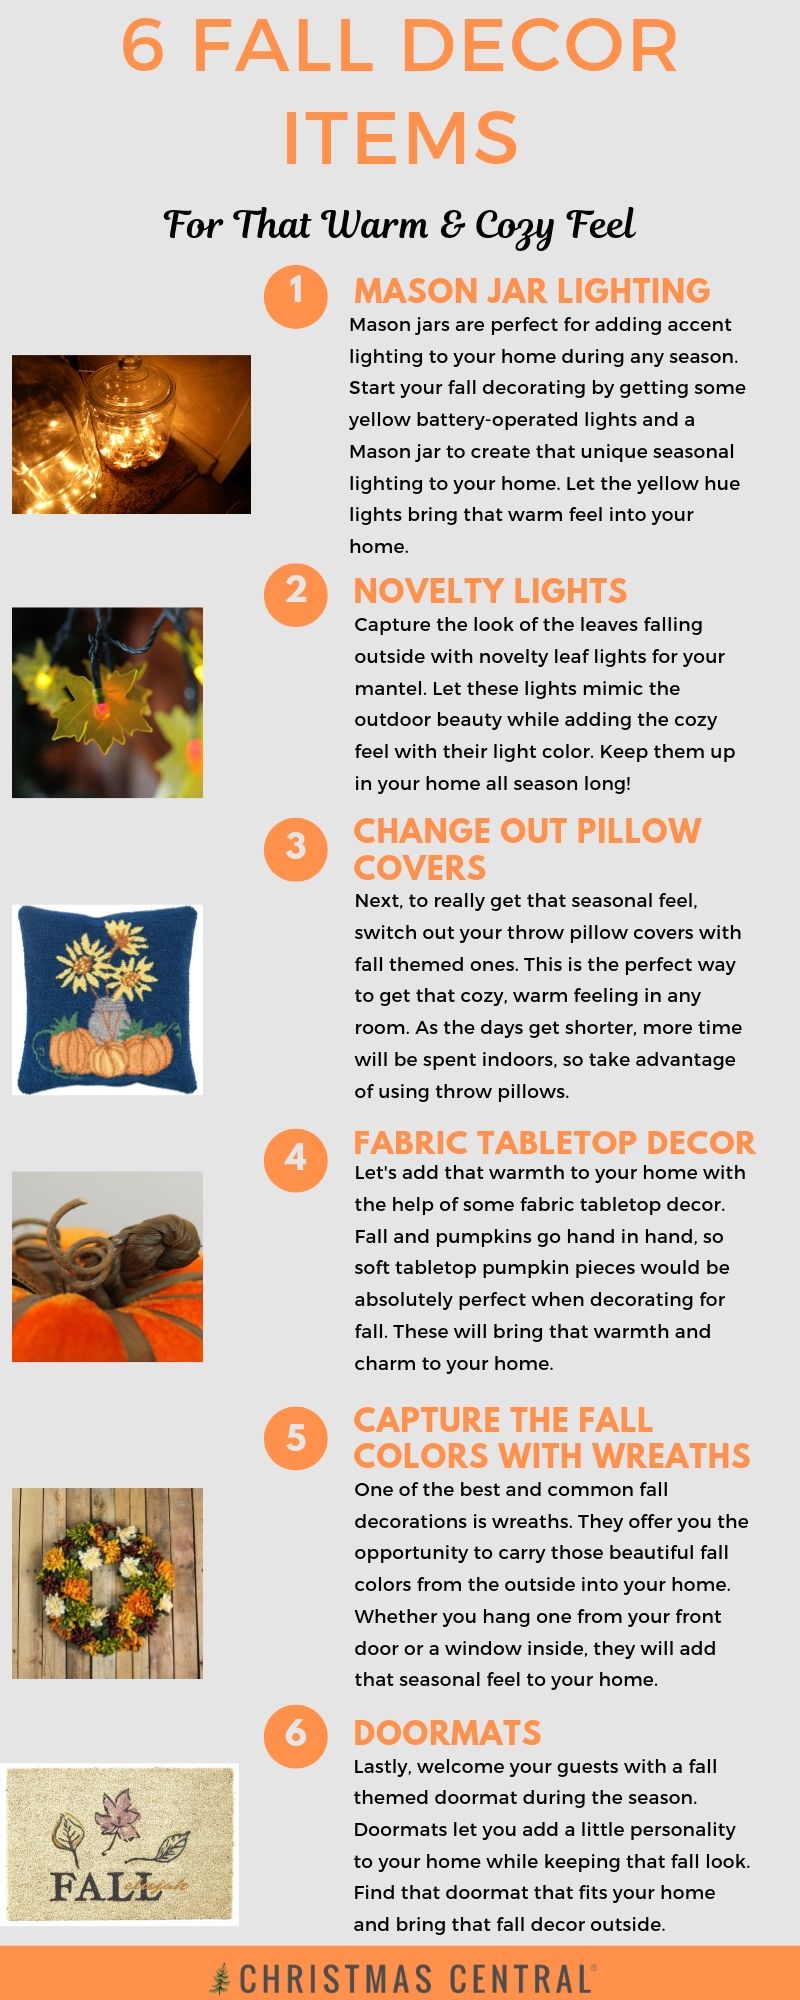 6 Fall Decor Items For Your Home